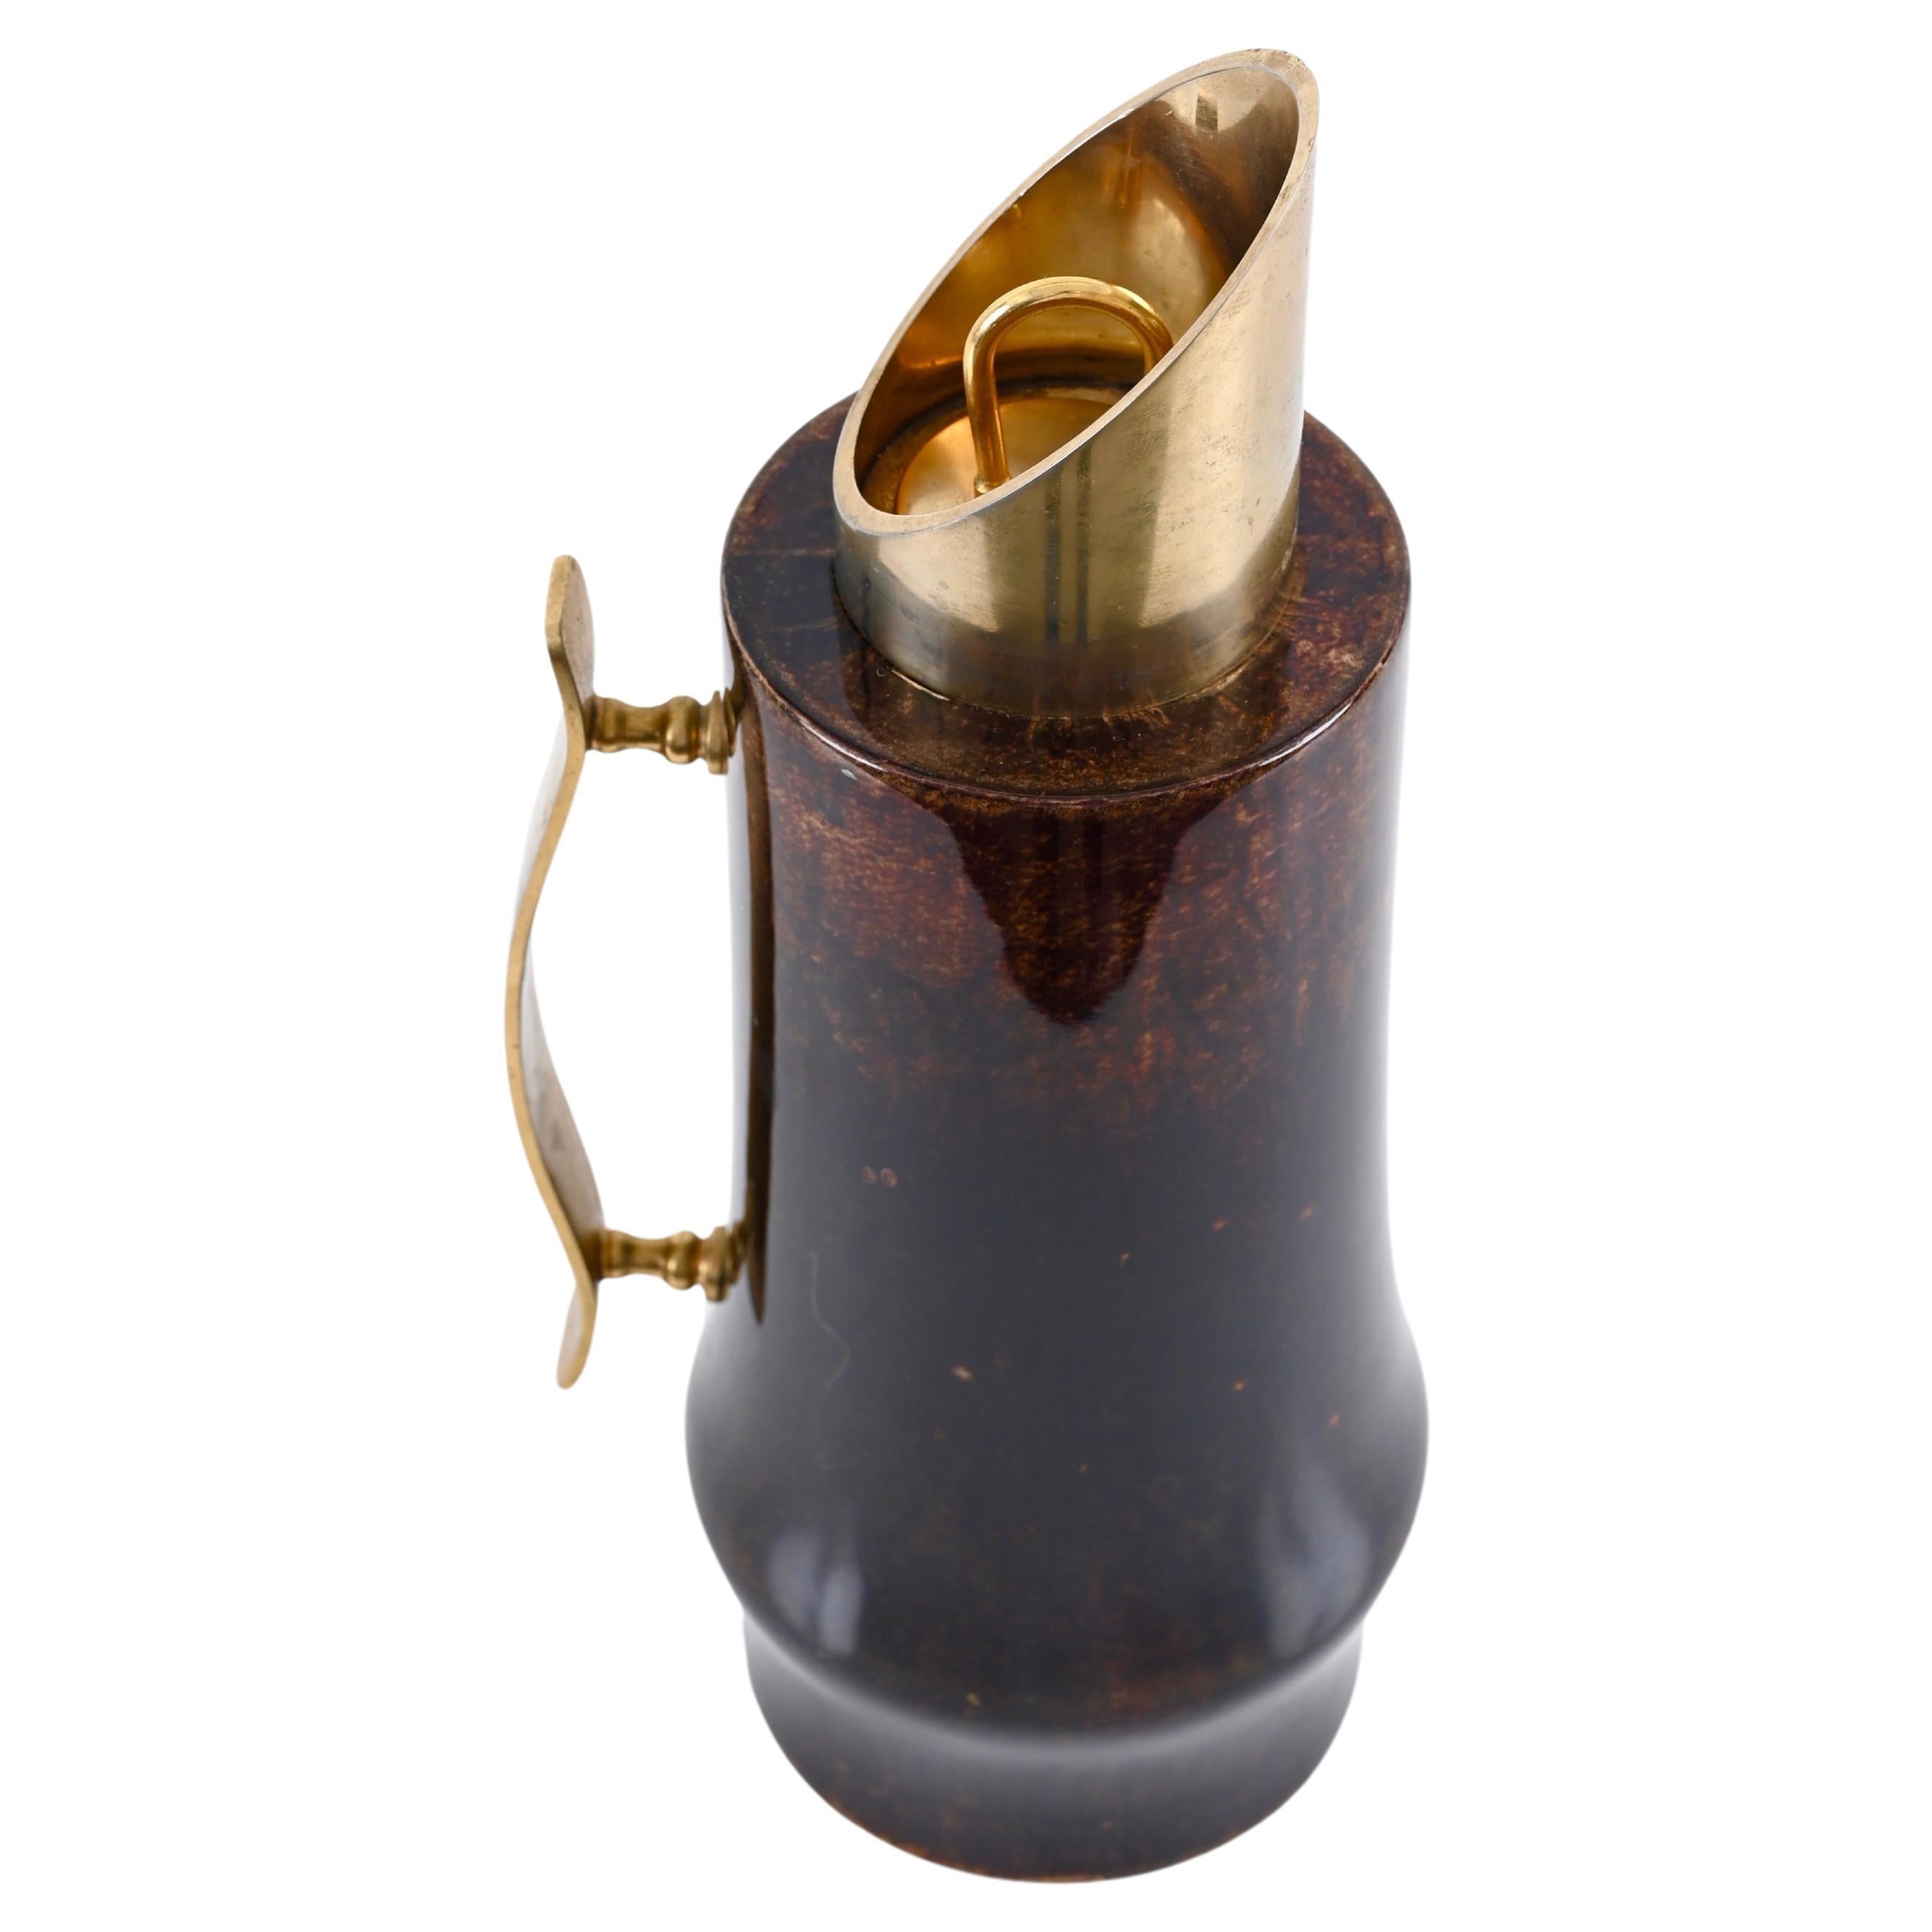 https://a.1stdibscdn.com/aldo-tura-midcentury-goatskin-and-brass-thermos-decanter-for-macabo-italy-1950s-for-sale/f_30673/f_368195021698428915501/f_36819502_1698428916453_bg_processed.jpg